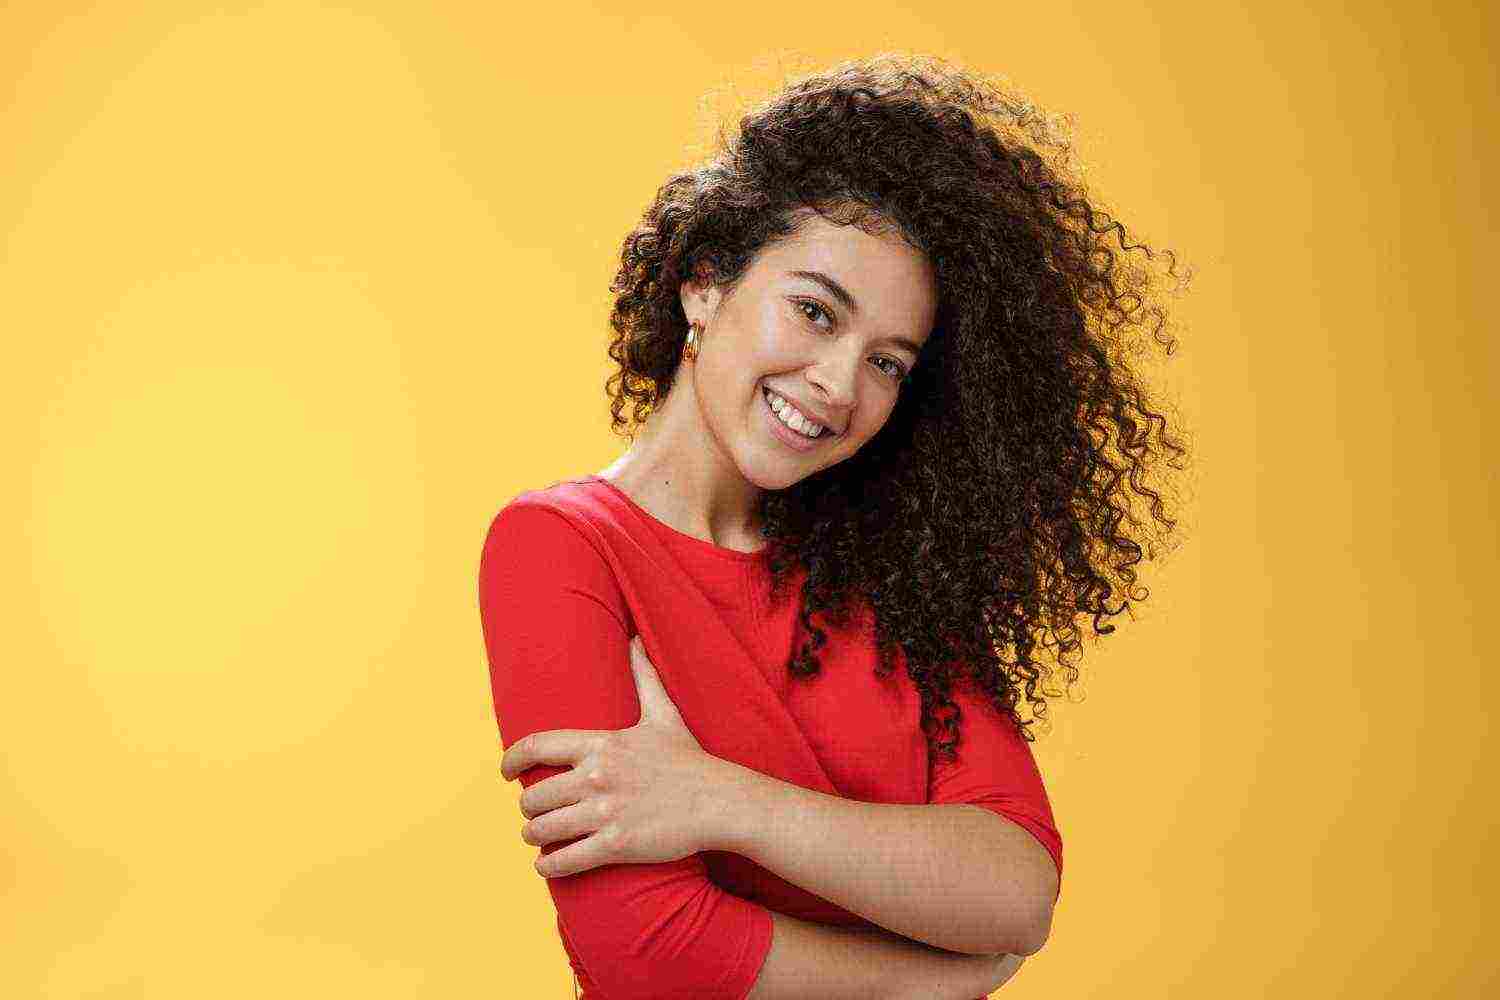 waist up shot tender feminine gentle woman with curly hairstyle combed right side tilting head smiling flirty making romantic gazed camera hugging herself yellow background